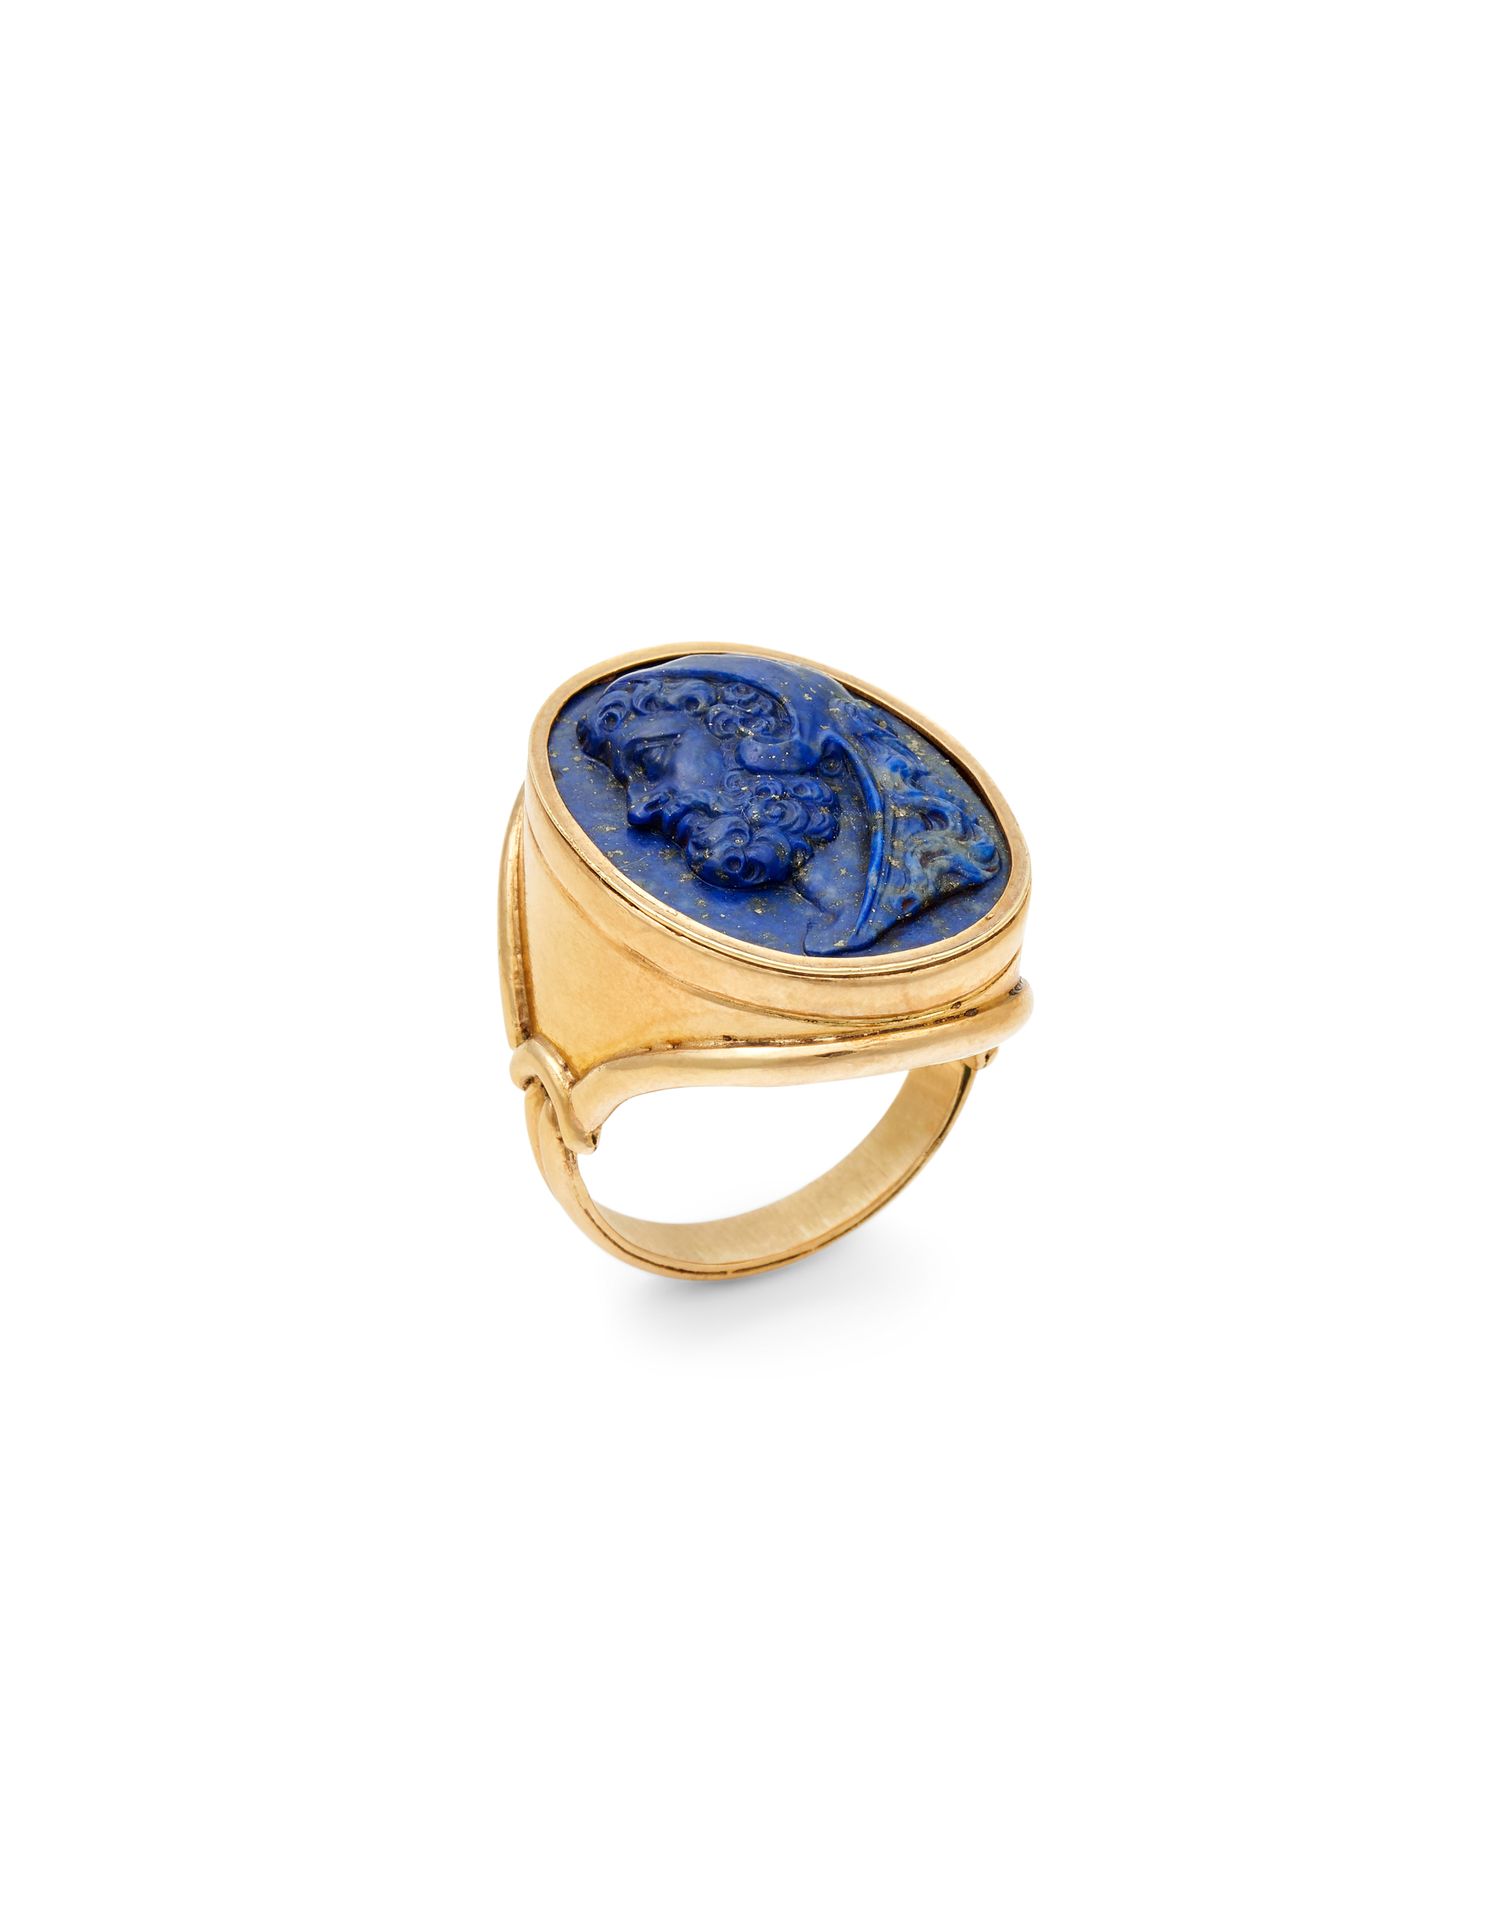 Null LAPIS- LAZULI CAMEO RINGS In 18K yellow gold, set with alapis-lazuli cameo &hellip;